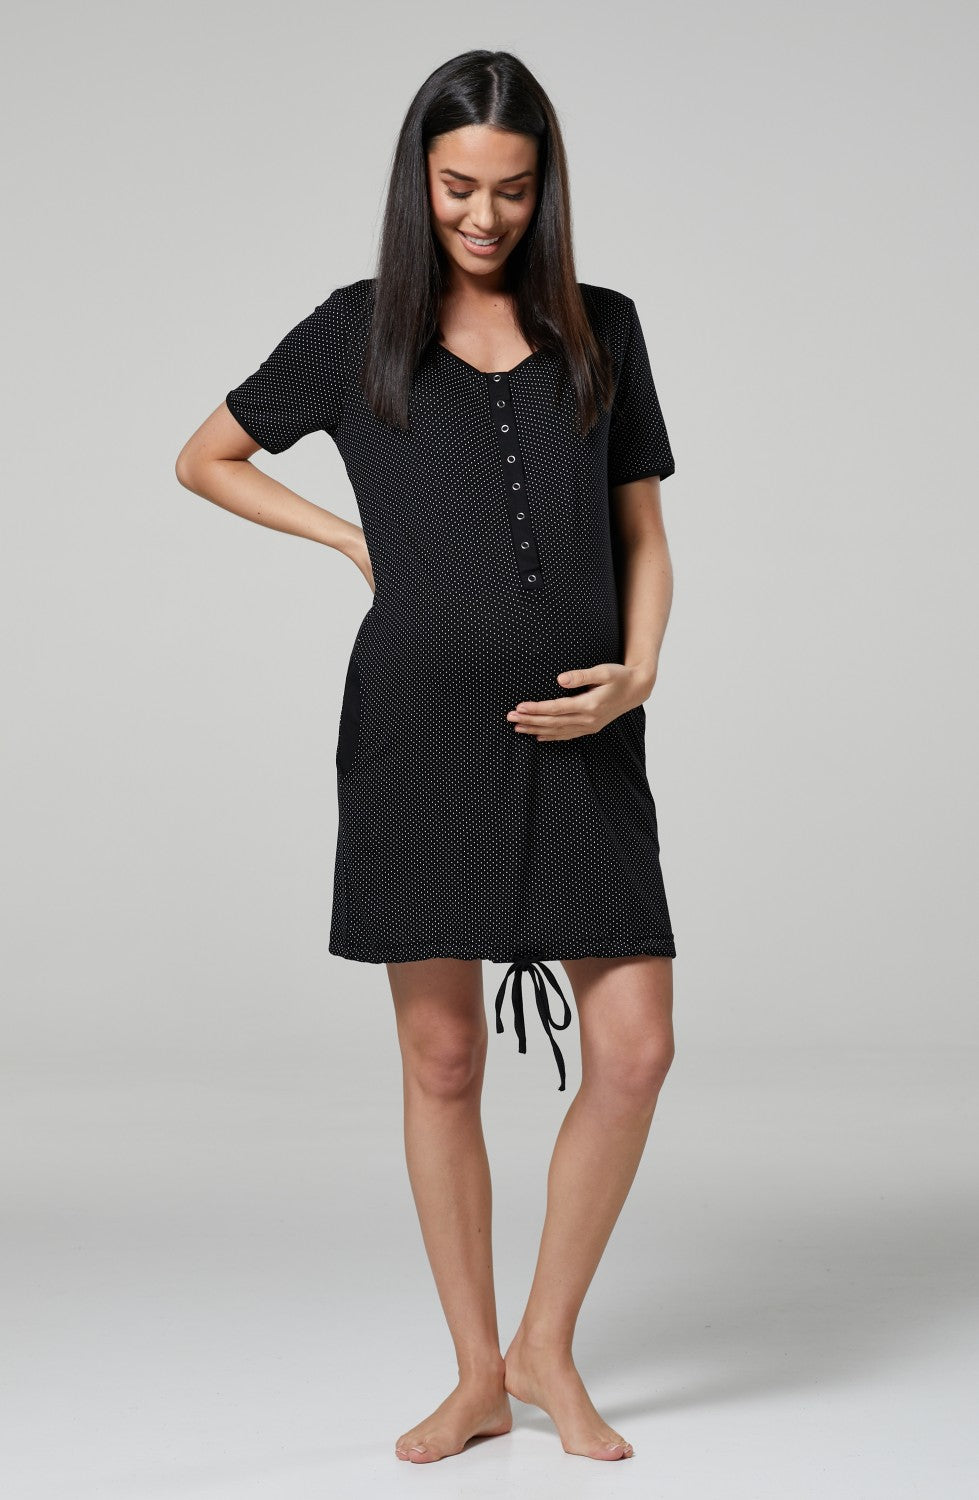 Maternity Delivery Hospital Gown